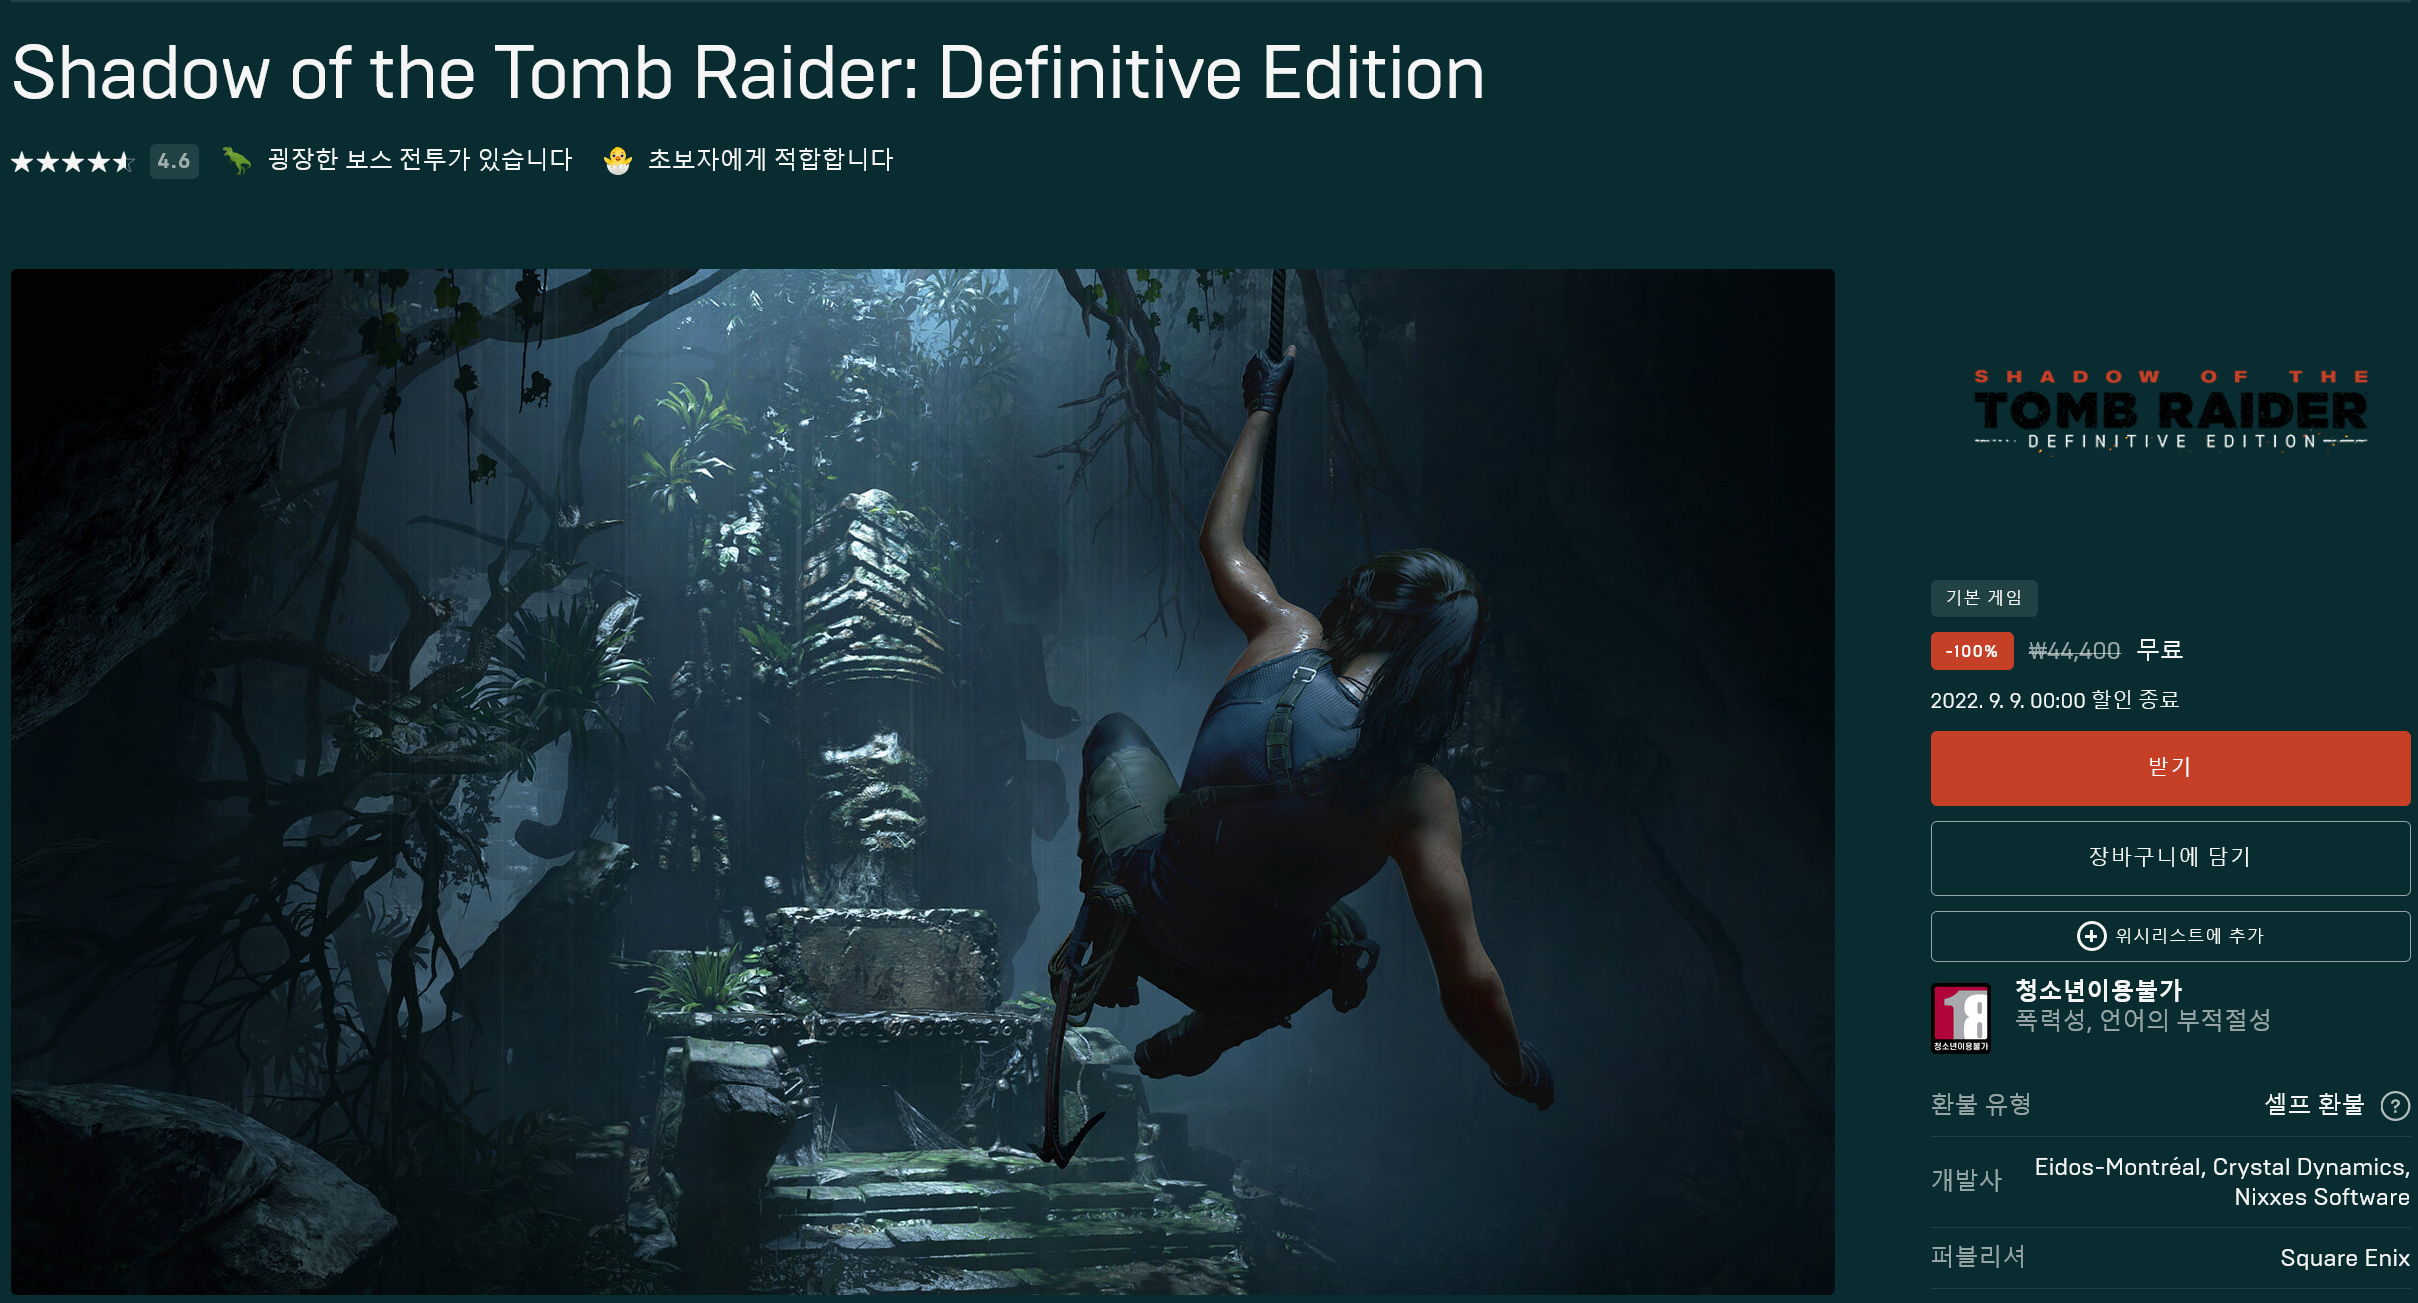 Screenshot 2022-09-02 at 00-26-15 Shadow of the Tomb Raider Definitive Edition 오늘 다운로드 및 구매 - Epic Games Store.png